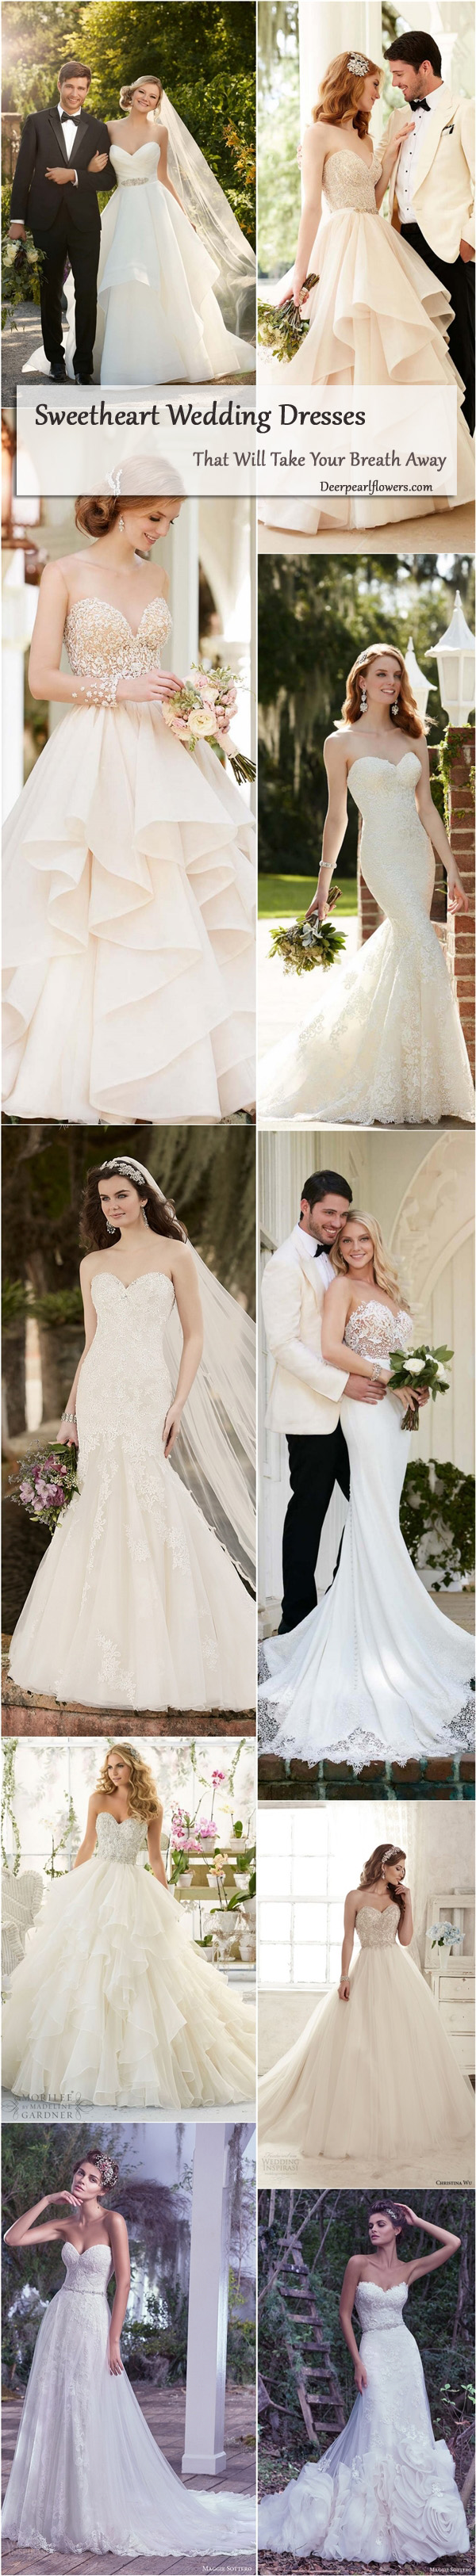 Sweetheart bridal dresses and gowns